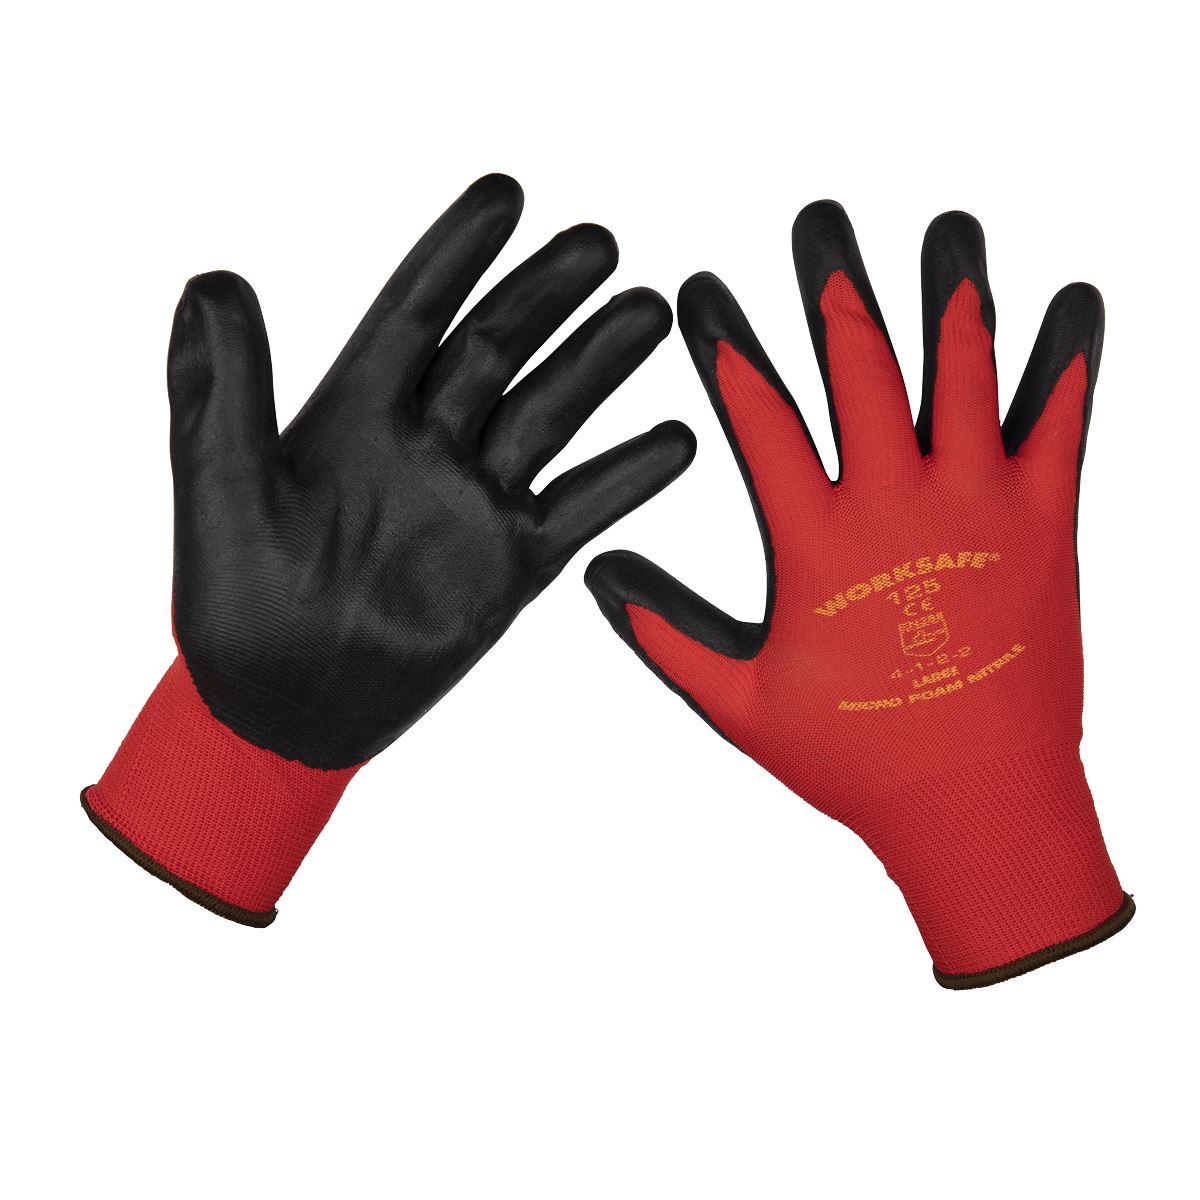 Worksafe by Sealey Flexi Grip Nitrile Palm Gloves (Large) - Pair